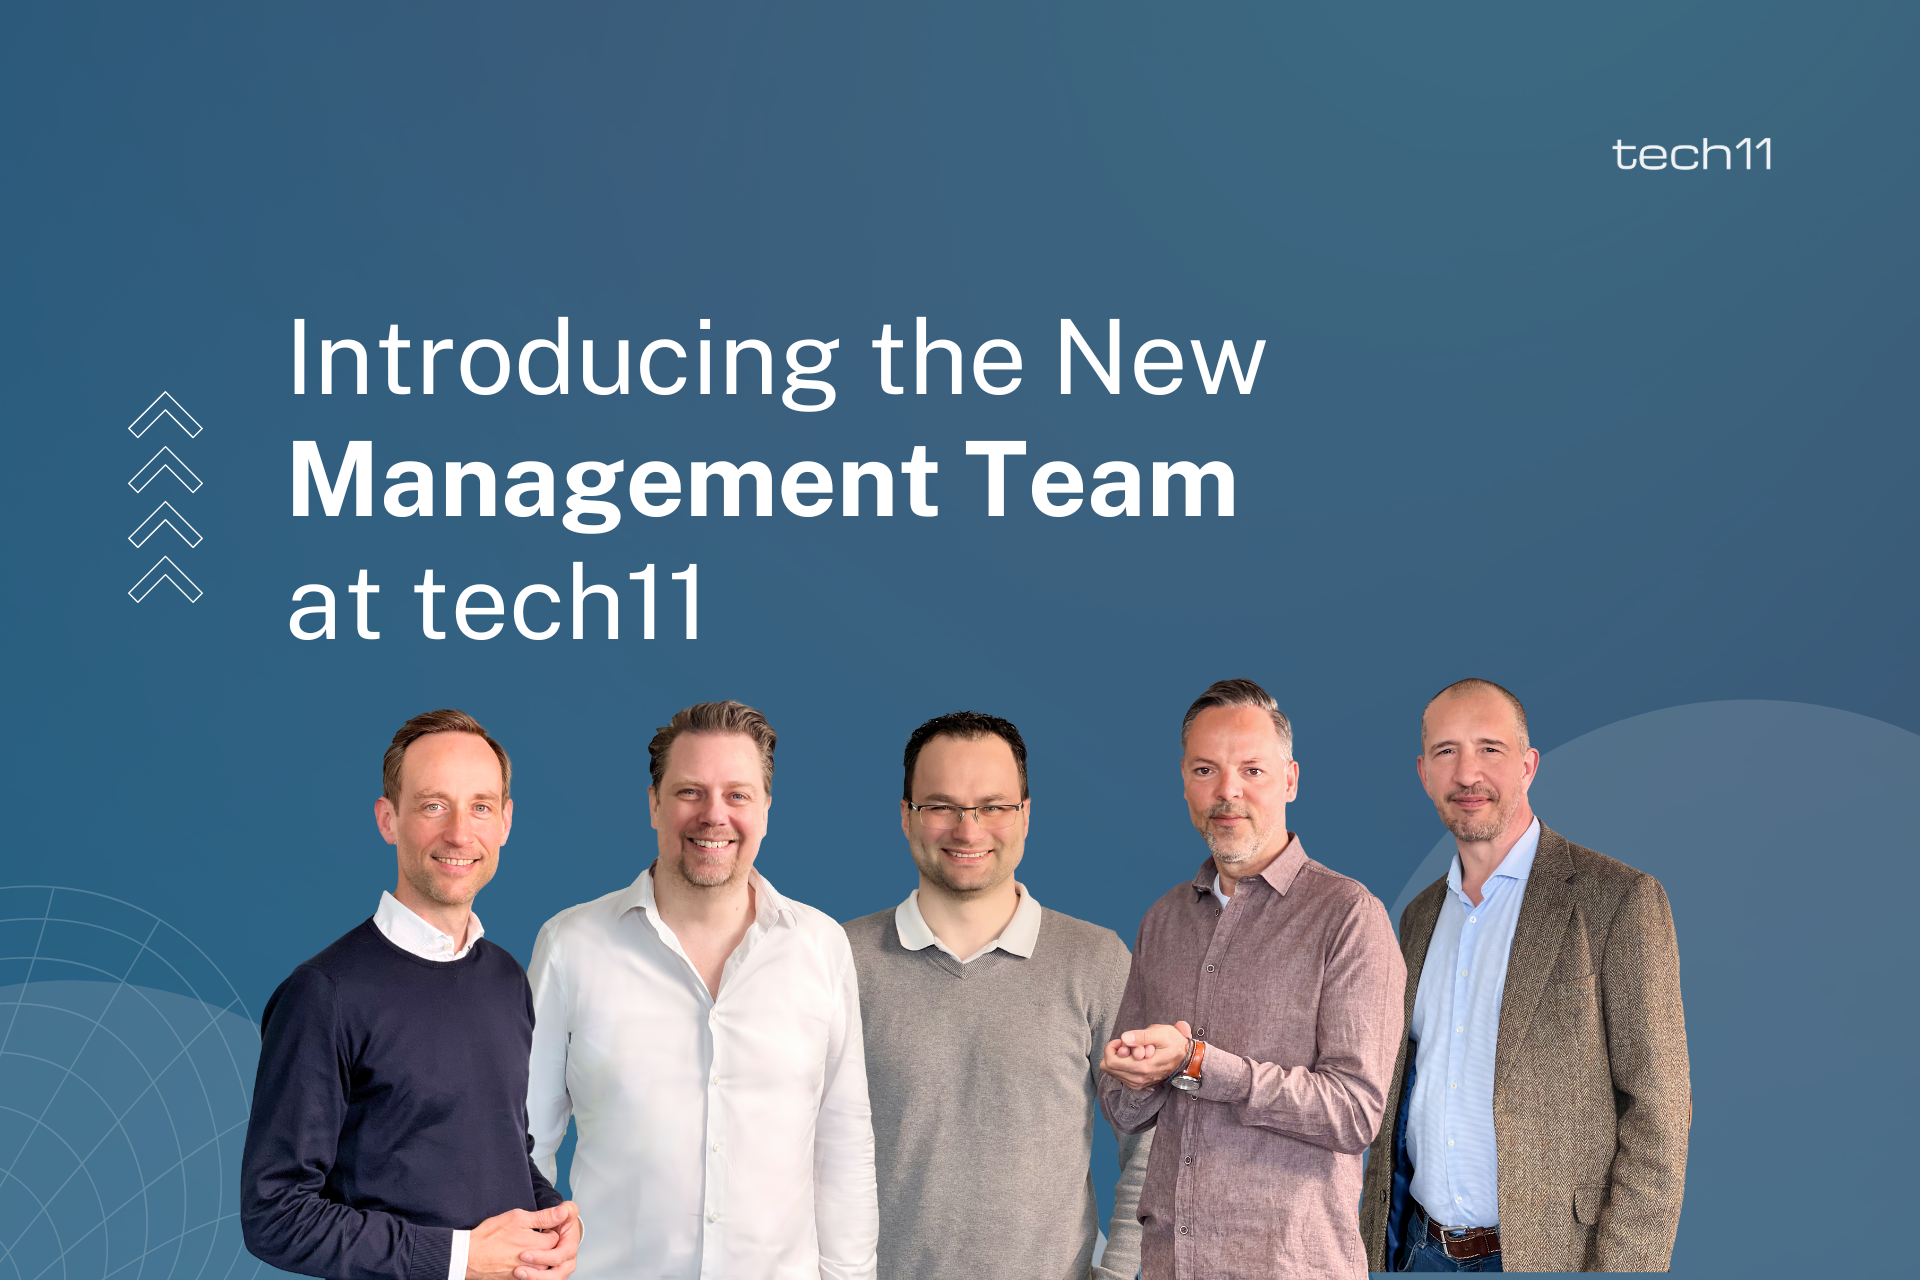 Oliver von Ameln becomes CEO at tech11 and strengthens the new management team